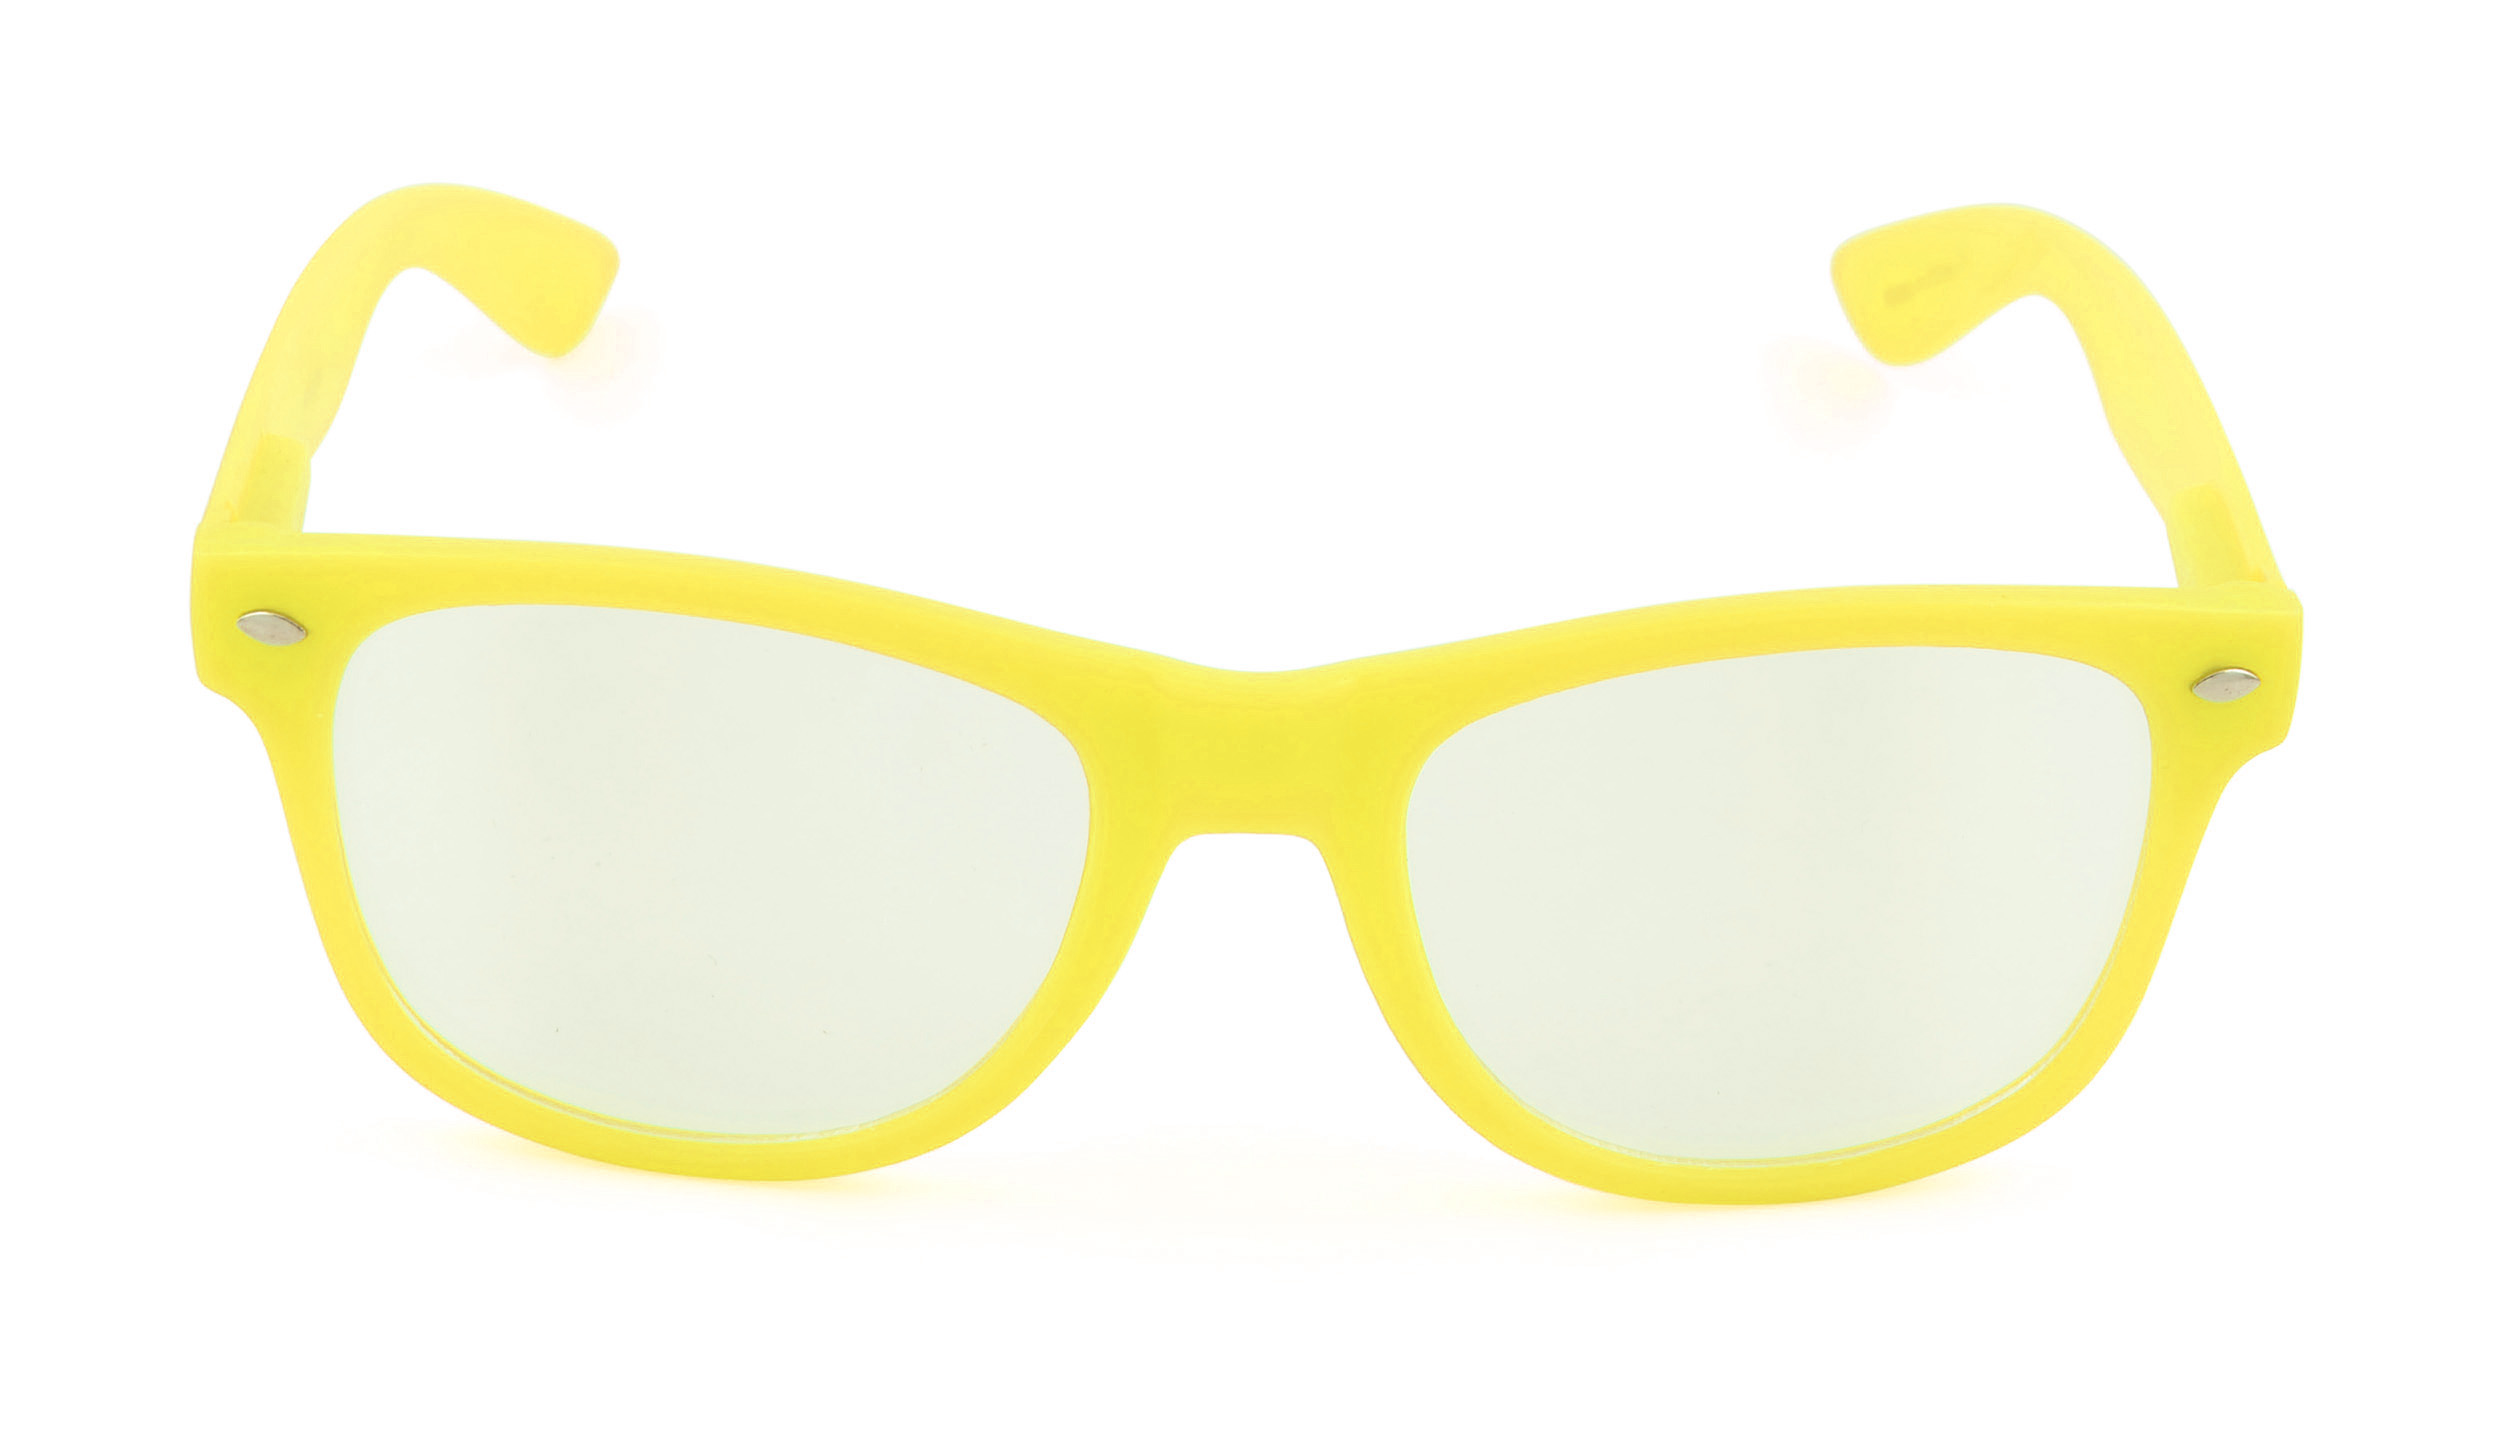 Belle Donne - Unisex Cool Rave Style Glow in the Dark Sunglasses - Yellow